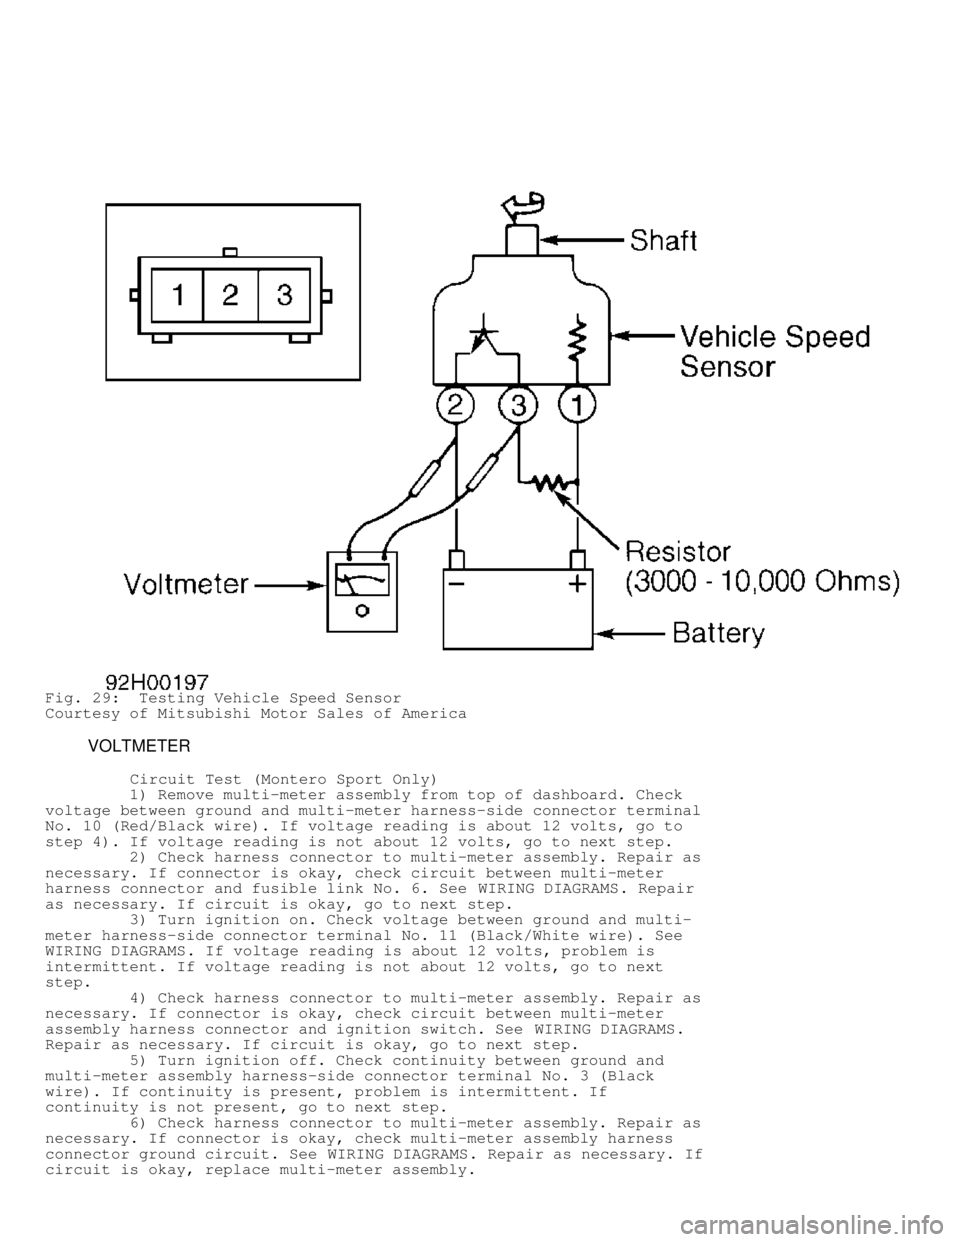 MITSUBISHI MONTERO 1998  Service Manual Fig. 29:  Testing Vehicle Speed Sensor
Courtesy of Mitsubishi Motor Sales of America
         VOLTMETER
          Circuit Test (Montero Sport Only)
         1) Remove multi-meter assembly from top of 